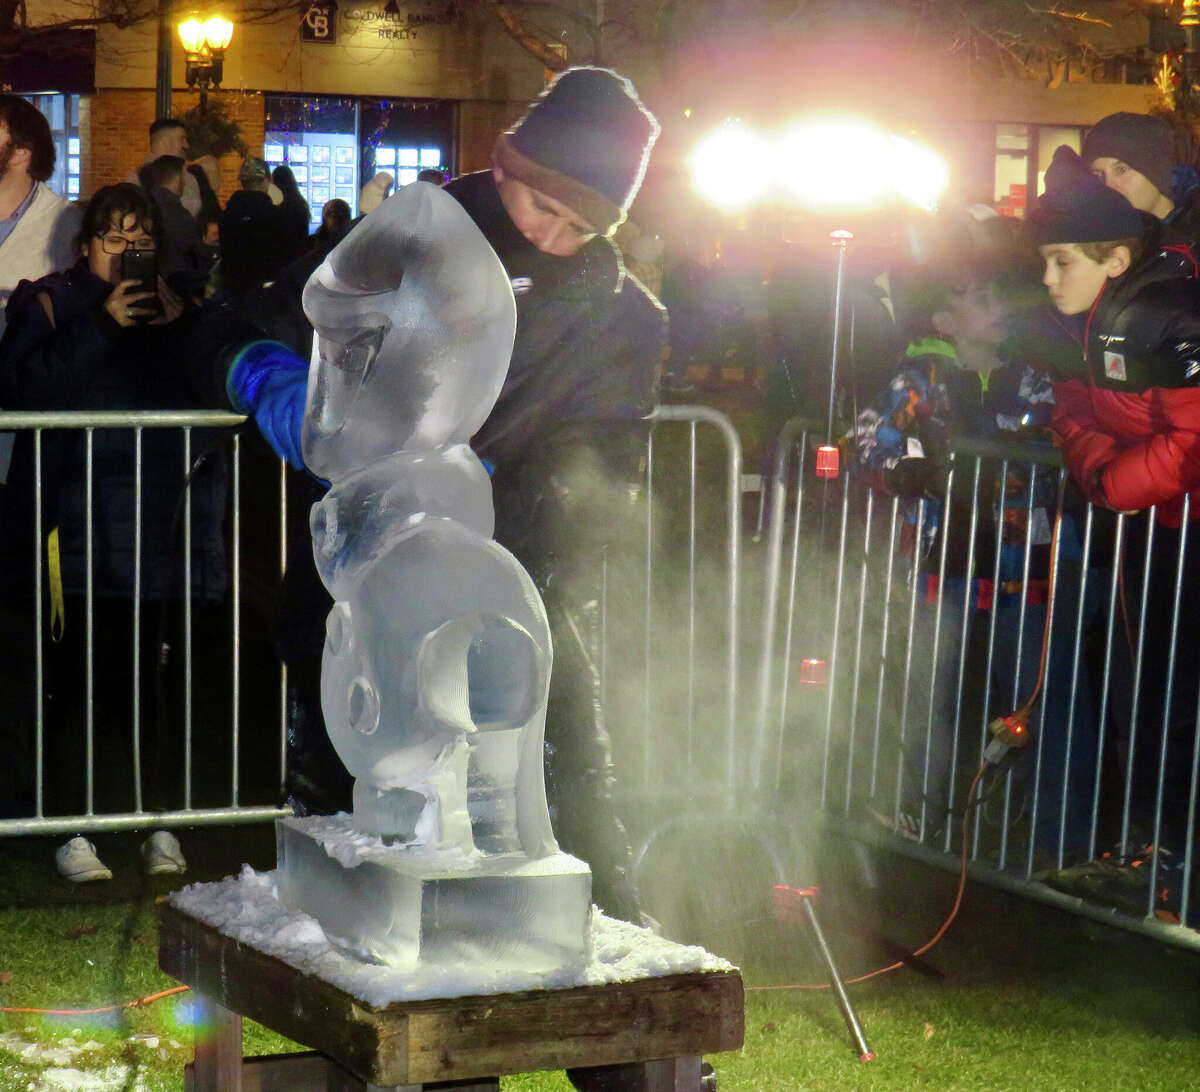 Bill Covitz of Ice Matters sculpting Olaf from "Frozen" at "First Night" celebration on Branford Green on Friday, Jan. 6.